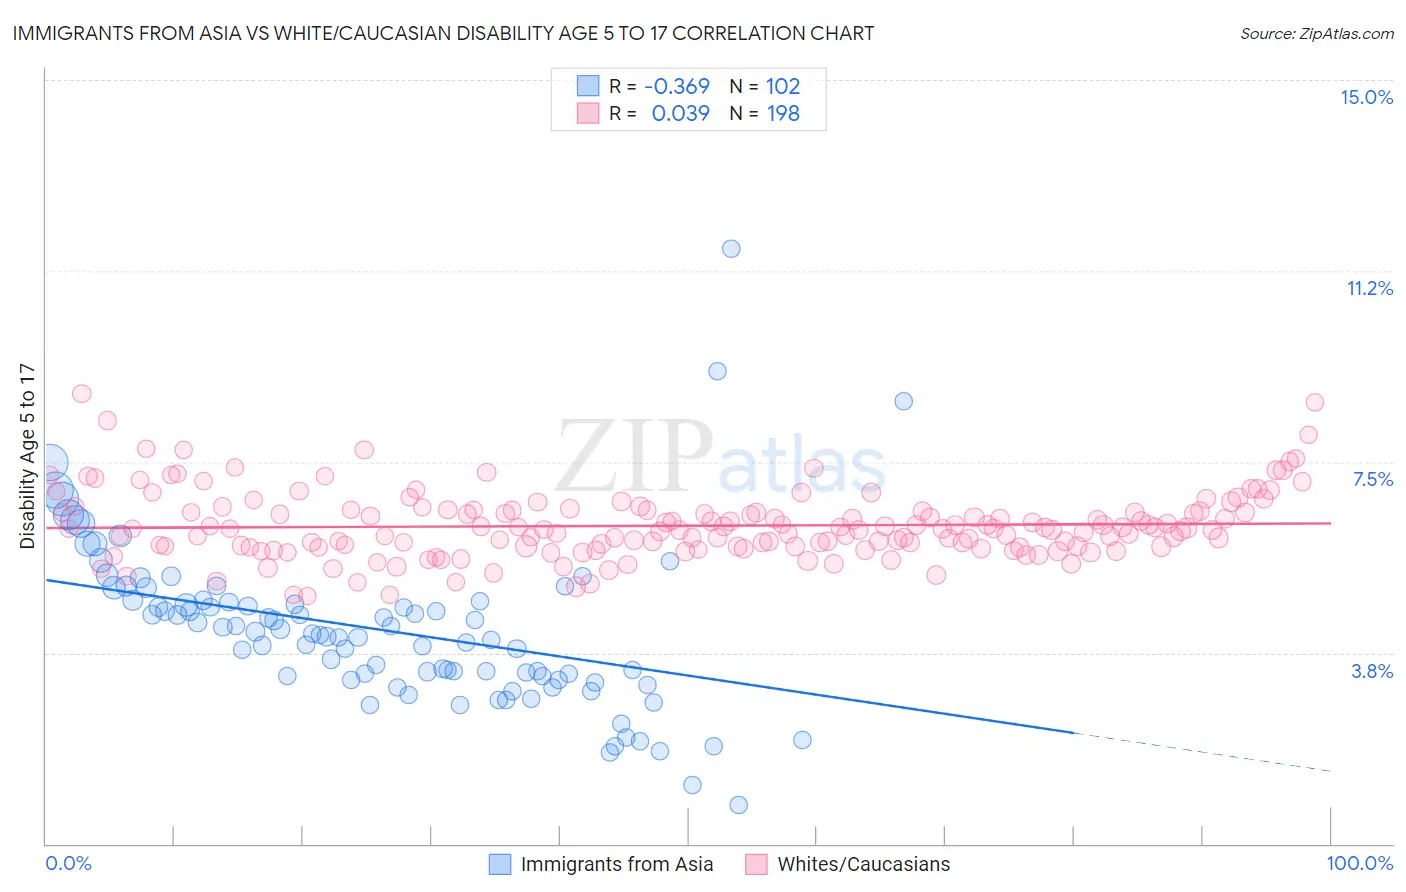 Immigrants from Asia vs White/Caucasian Disability Age 5 to 17